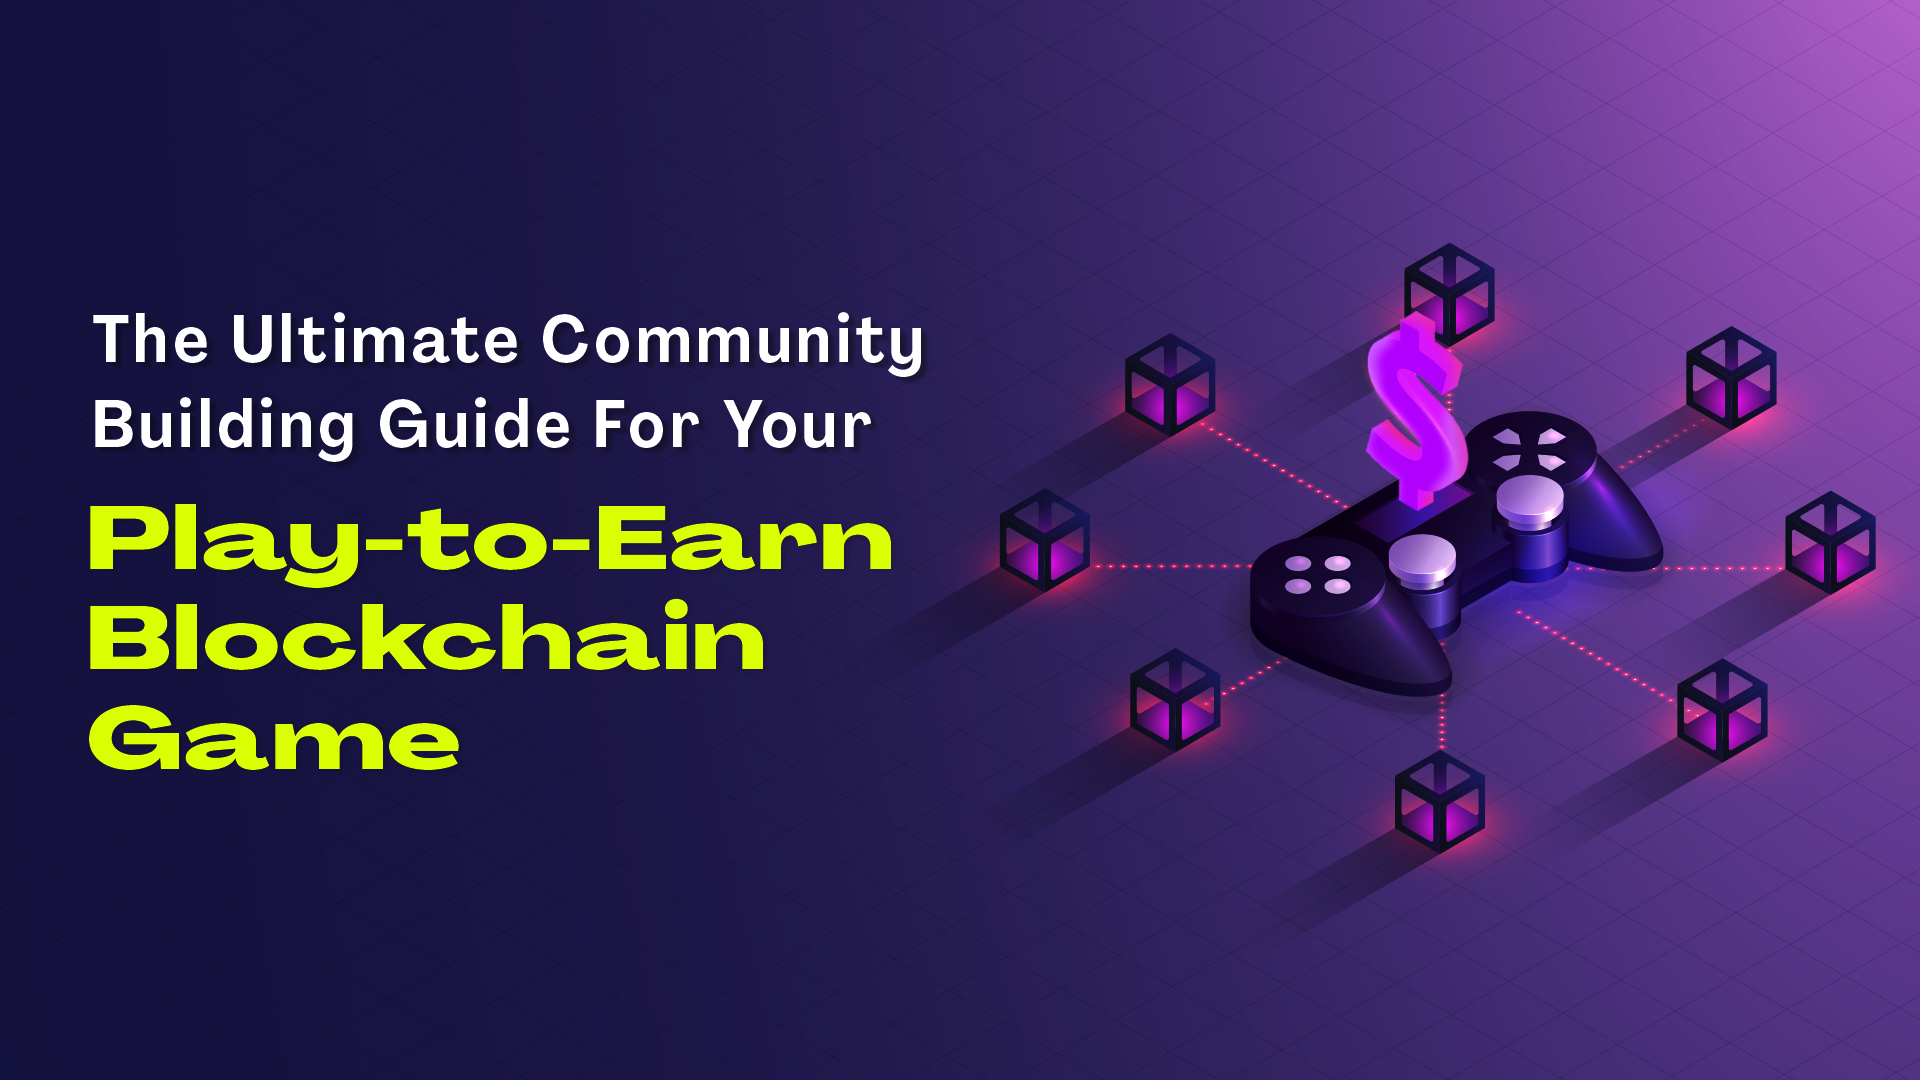 The Ultimate Community Building Guide For Your Play-to-Earn Blockchain Game